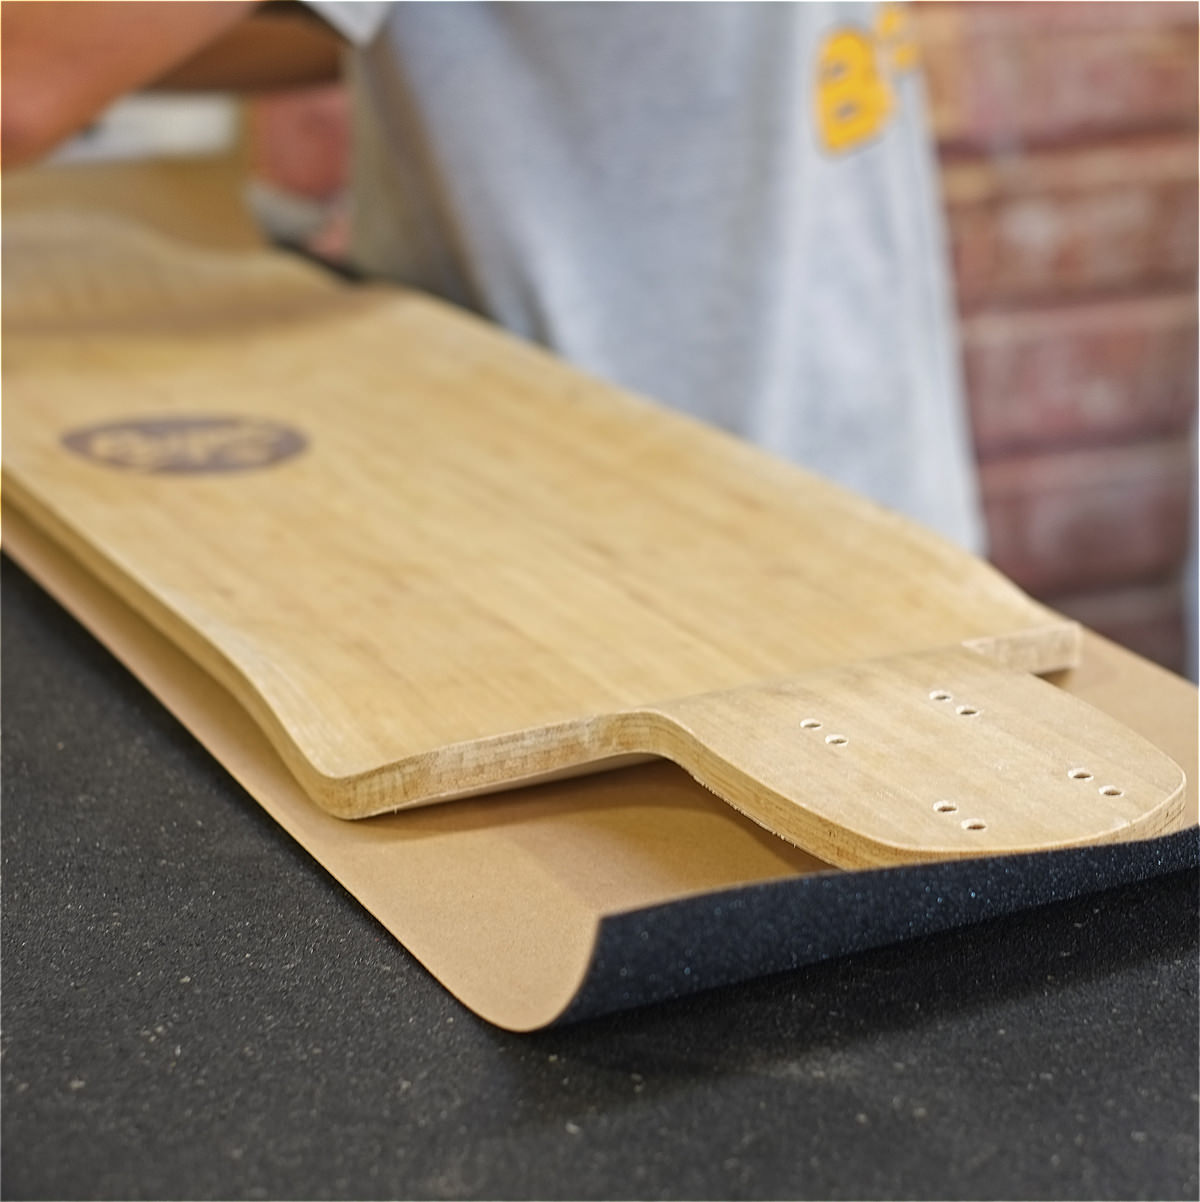 DIY: How To Grip Tape - The Longboard Store